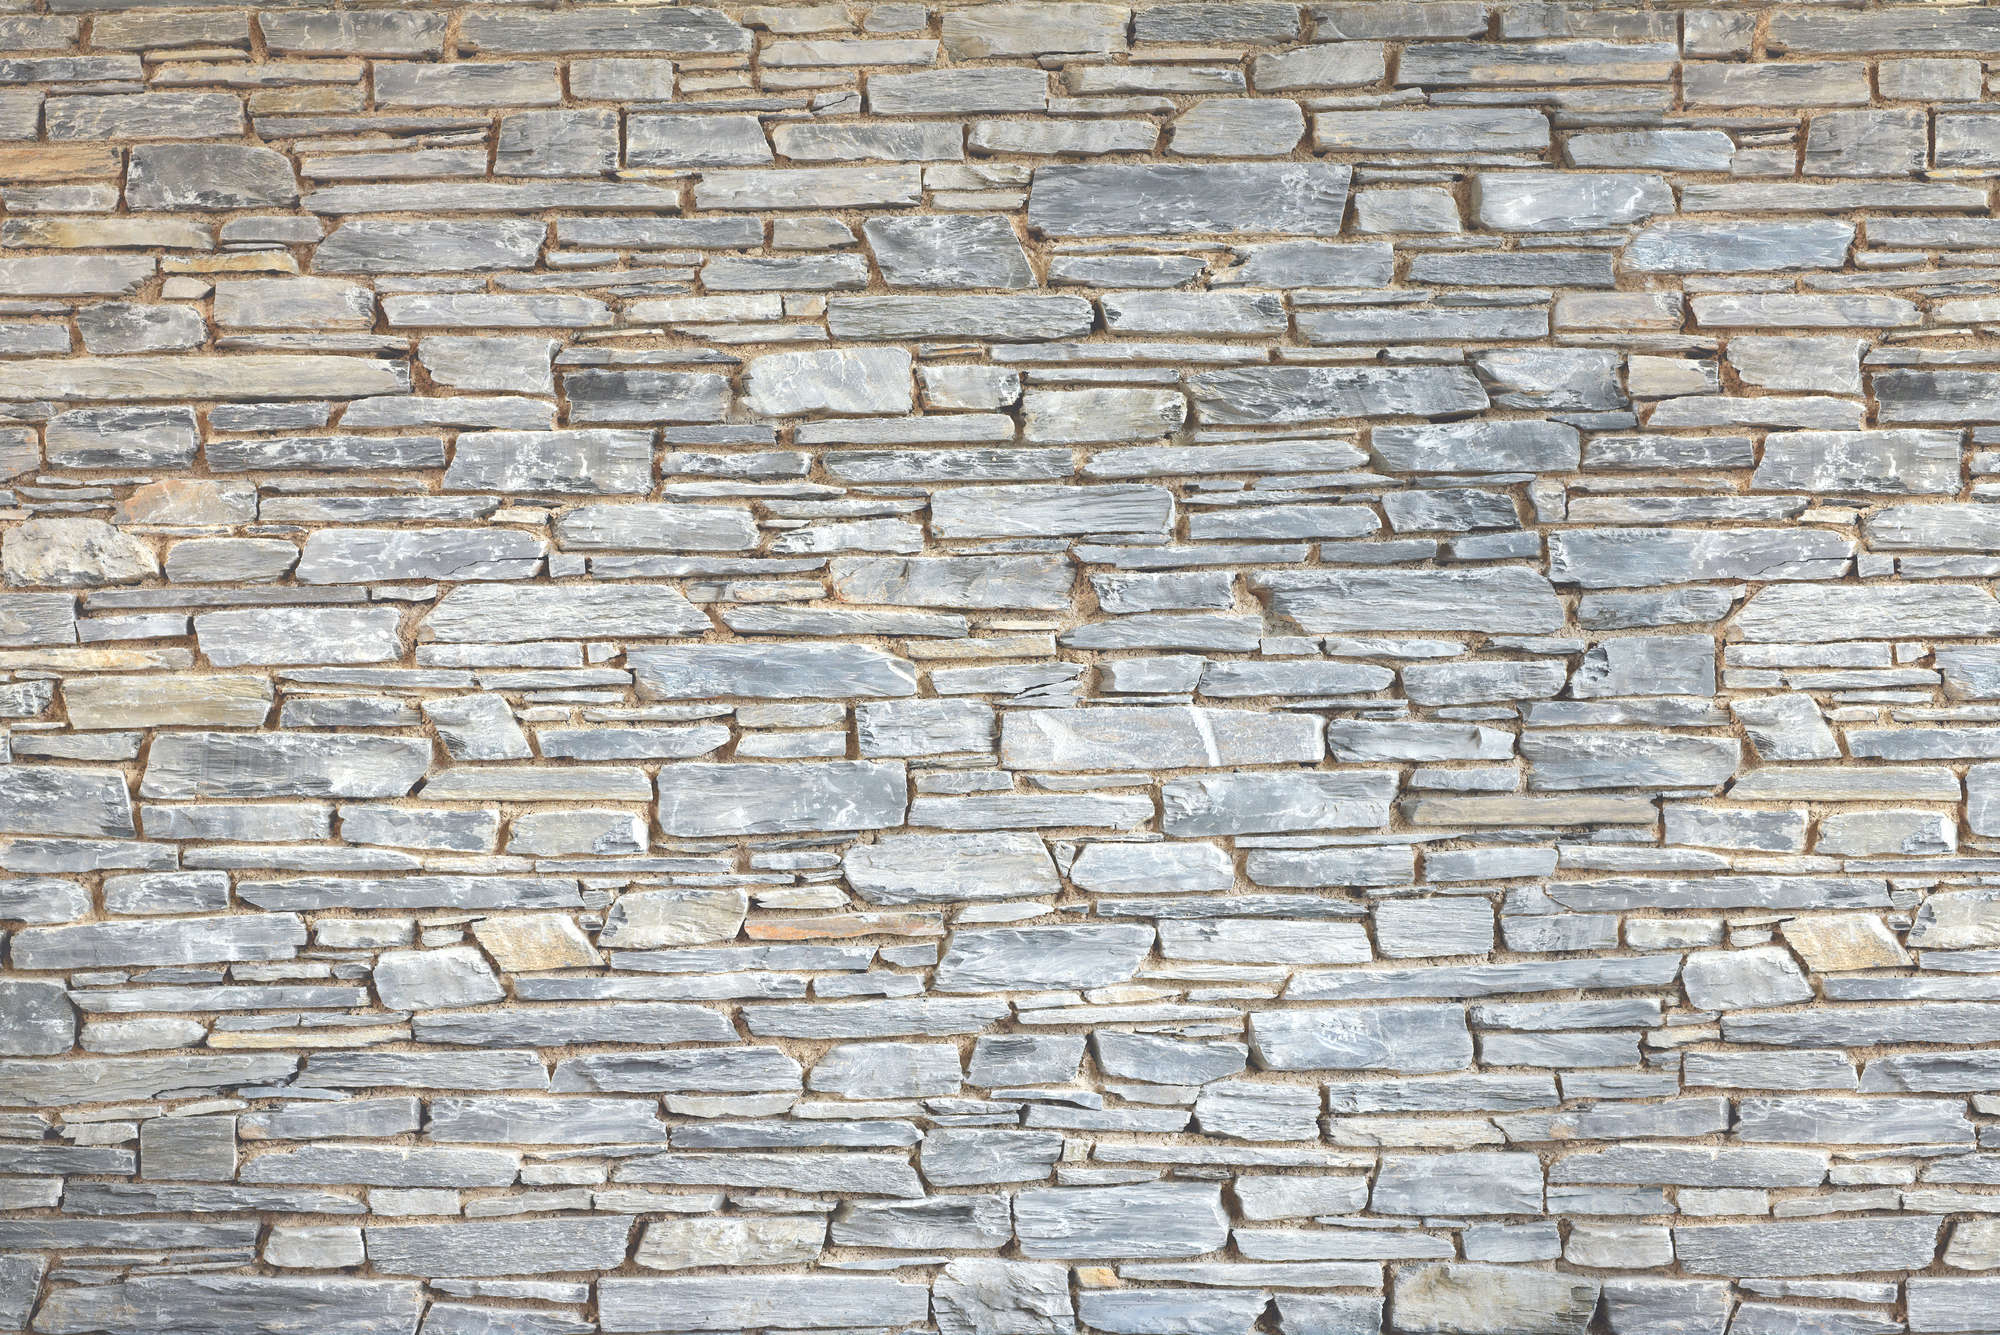             Industrial wall mural natural stone wall on premium smooth fleece
        